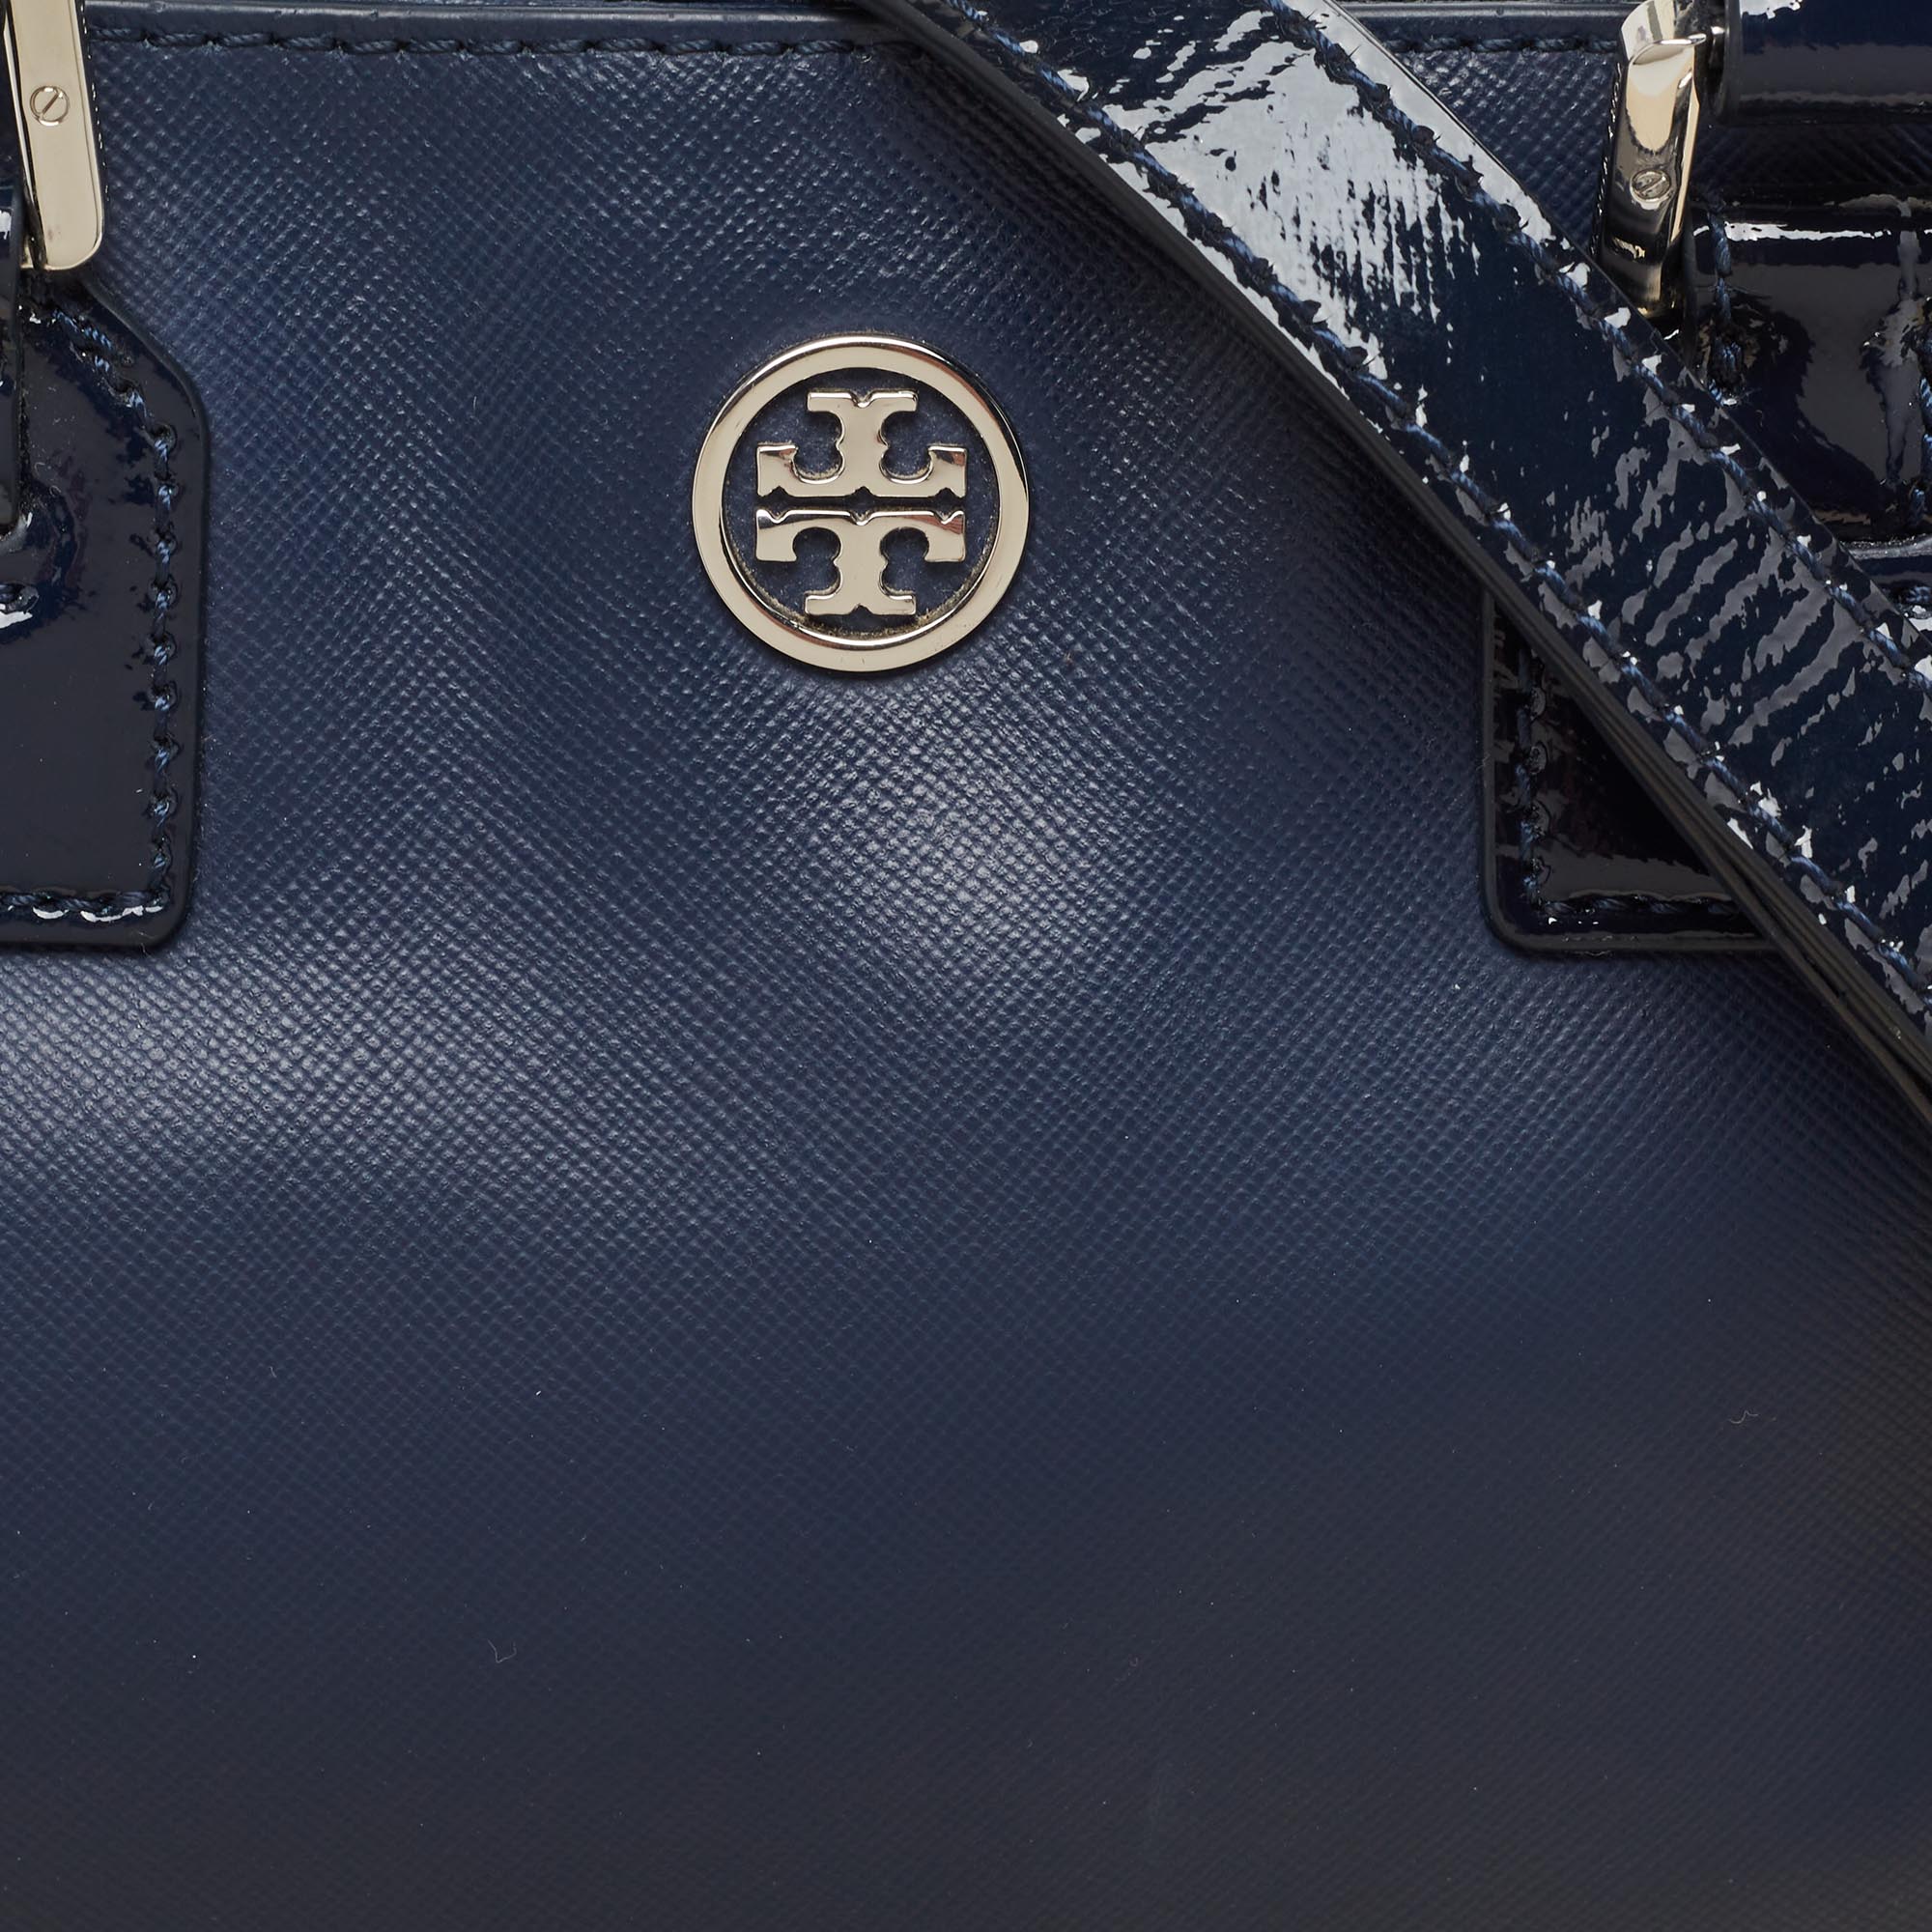 Tory Burch Blue Patent And Leather Robinson Middy Satchel